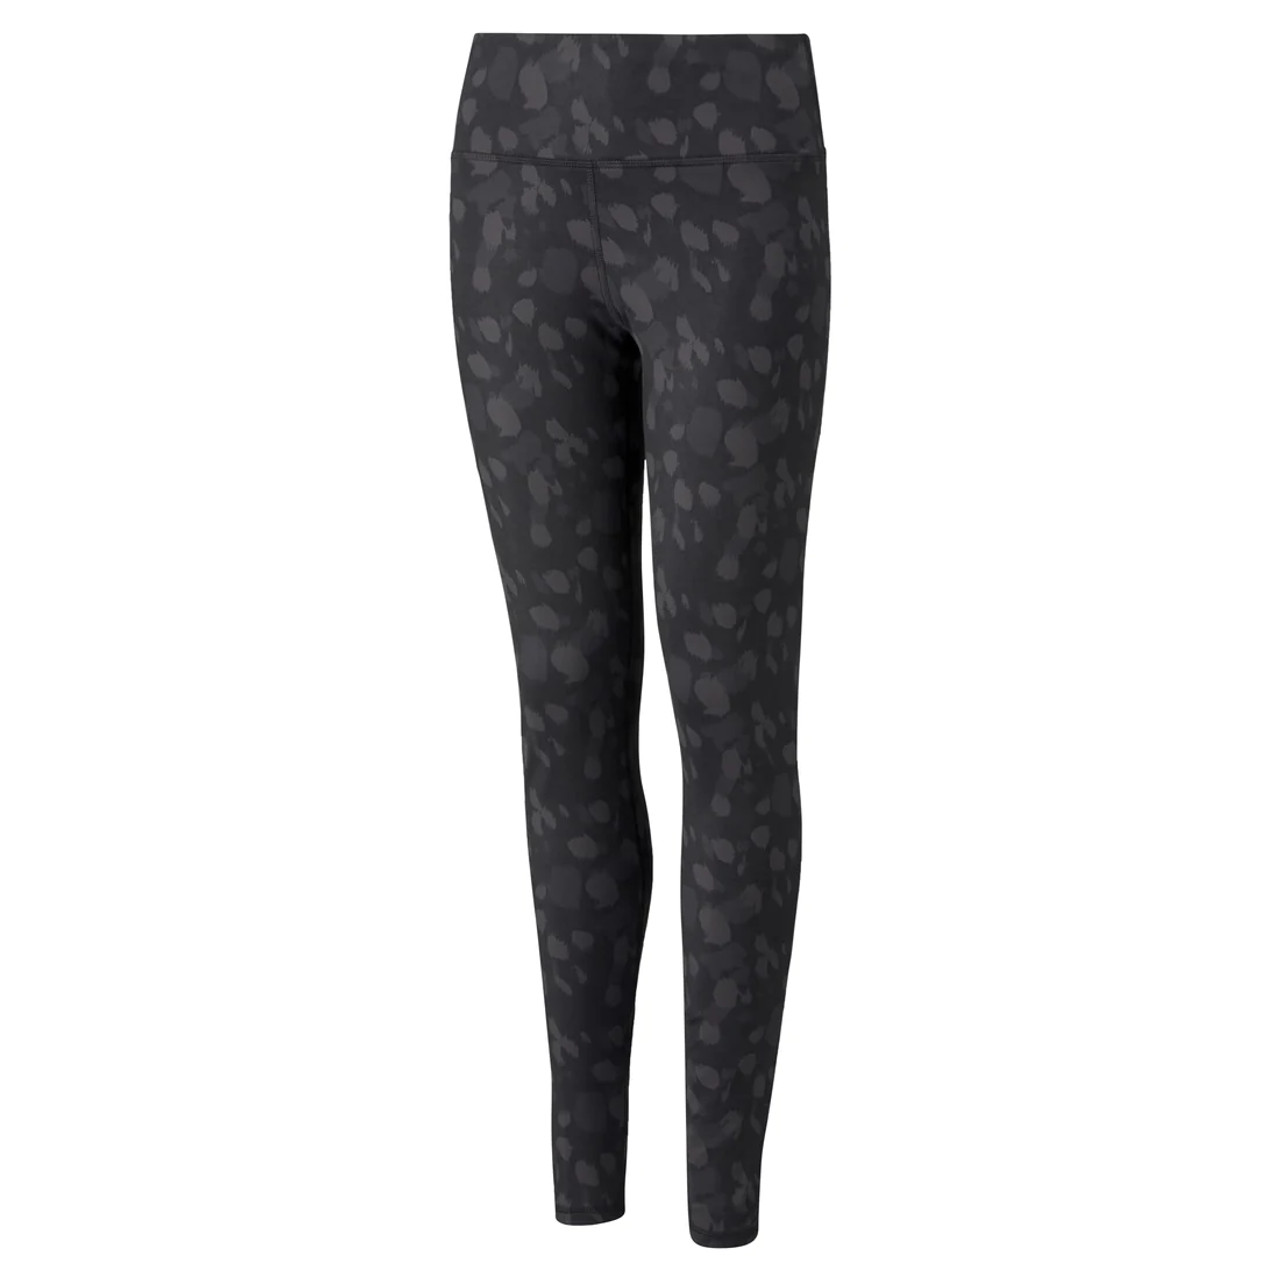 Puma Women's Printed Tights Golf Pants - Puma Black - Fore Ladies - Golf  Dresses and Clothes, Tennis Skirts and Outfits, and Fashionable Activewear